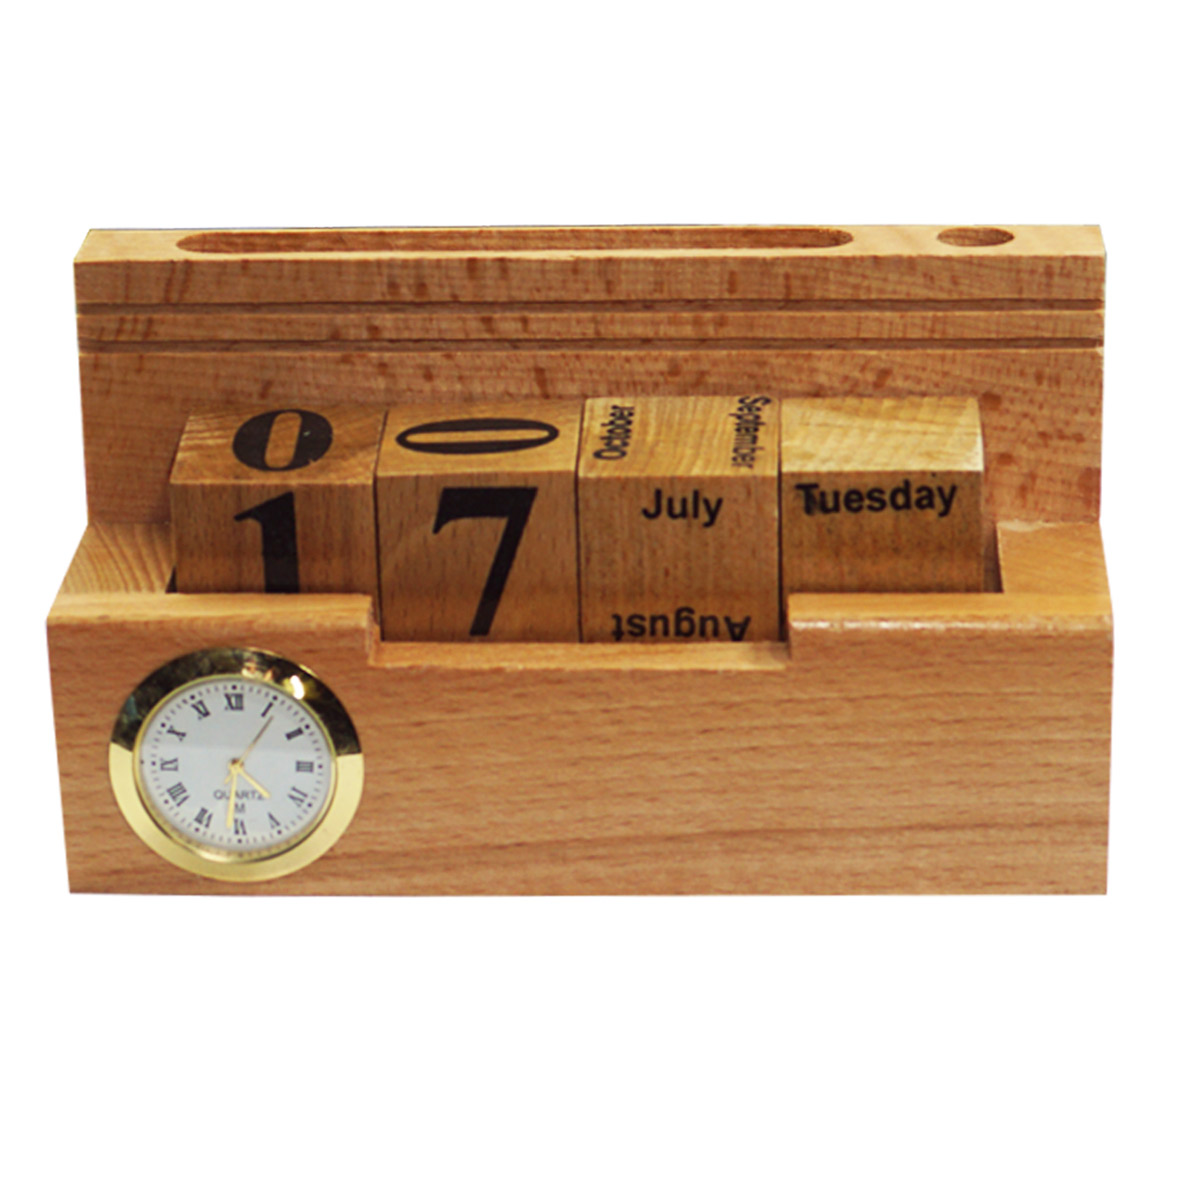 penhouse.in Wooden Customize Pen stand With Calender with Clock SKU 96546